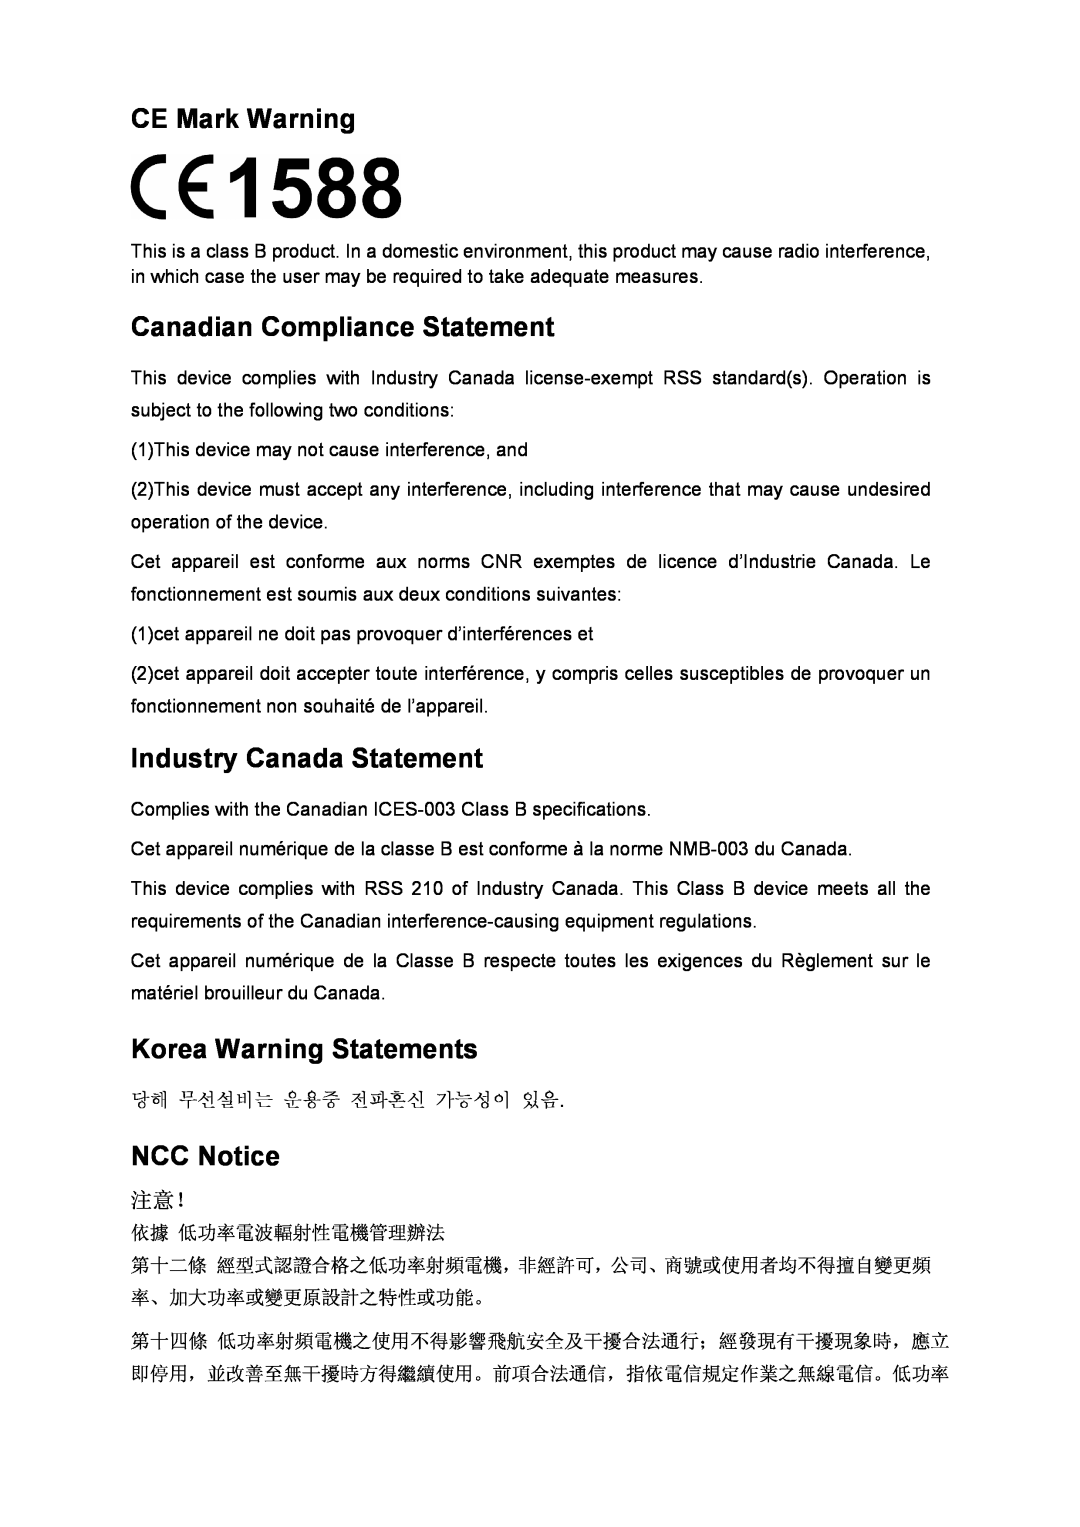 TP-Link TL-WN727N CE Mark Warning, Canadian Compliance Statement, Industry Canada Statement, Korea Warning Statements 